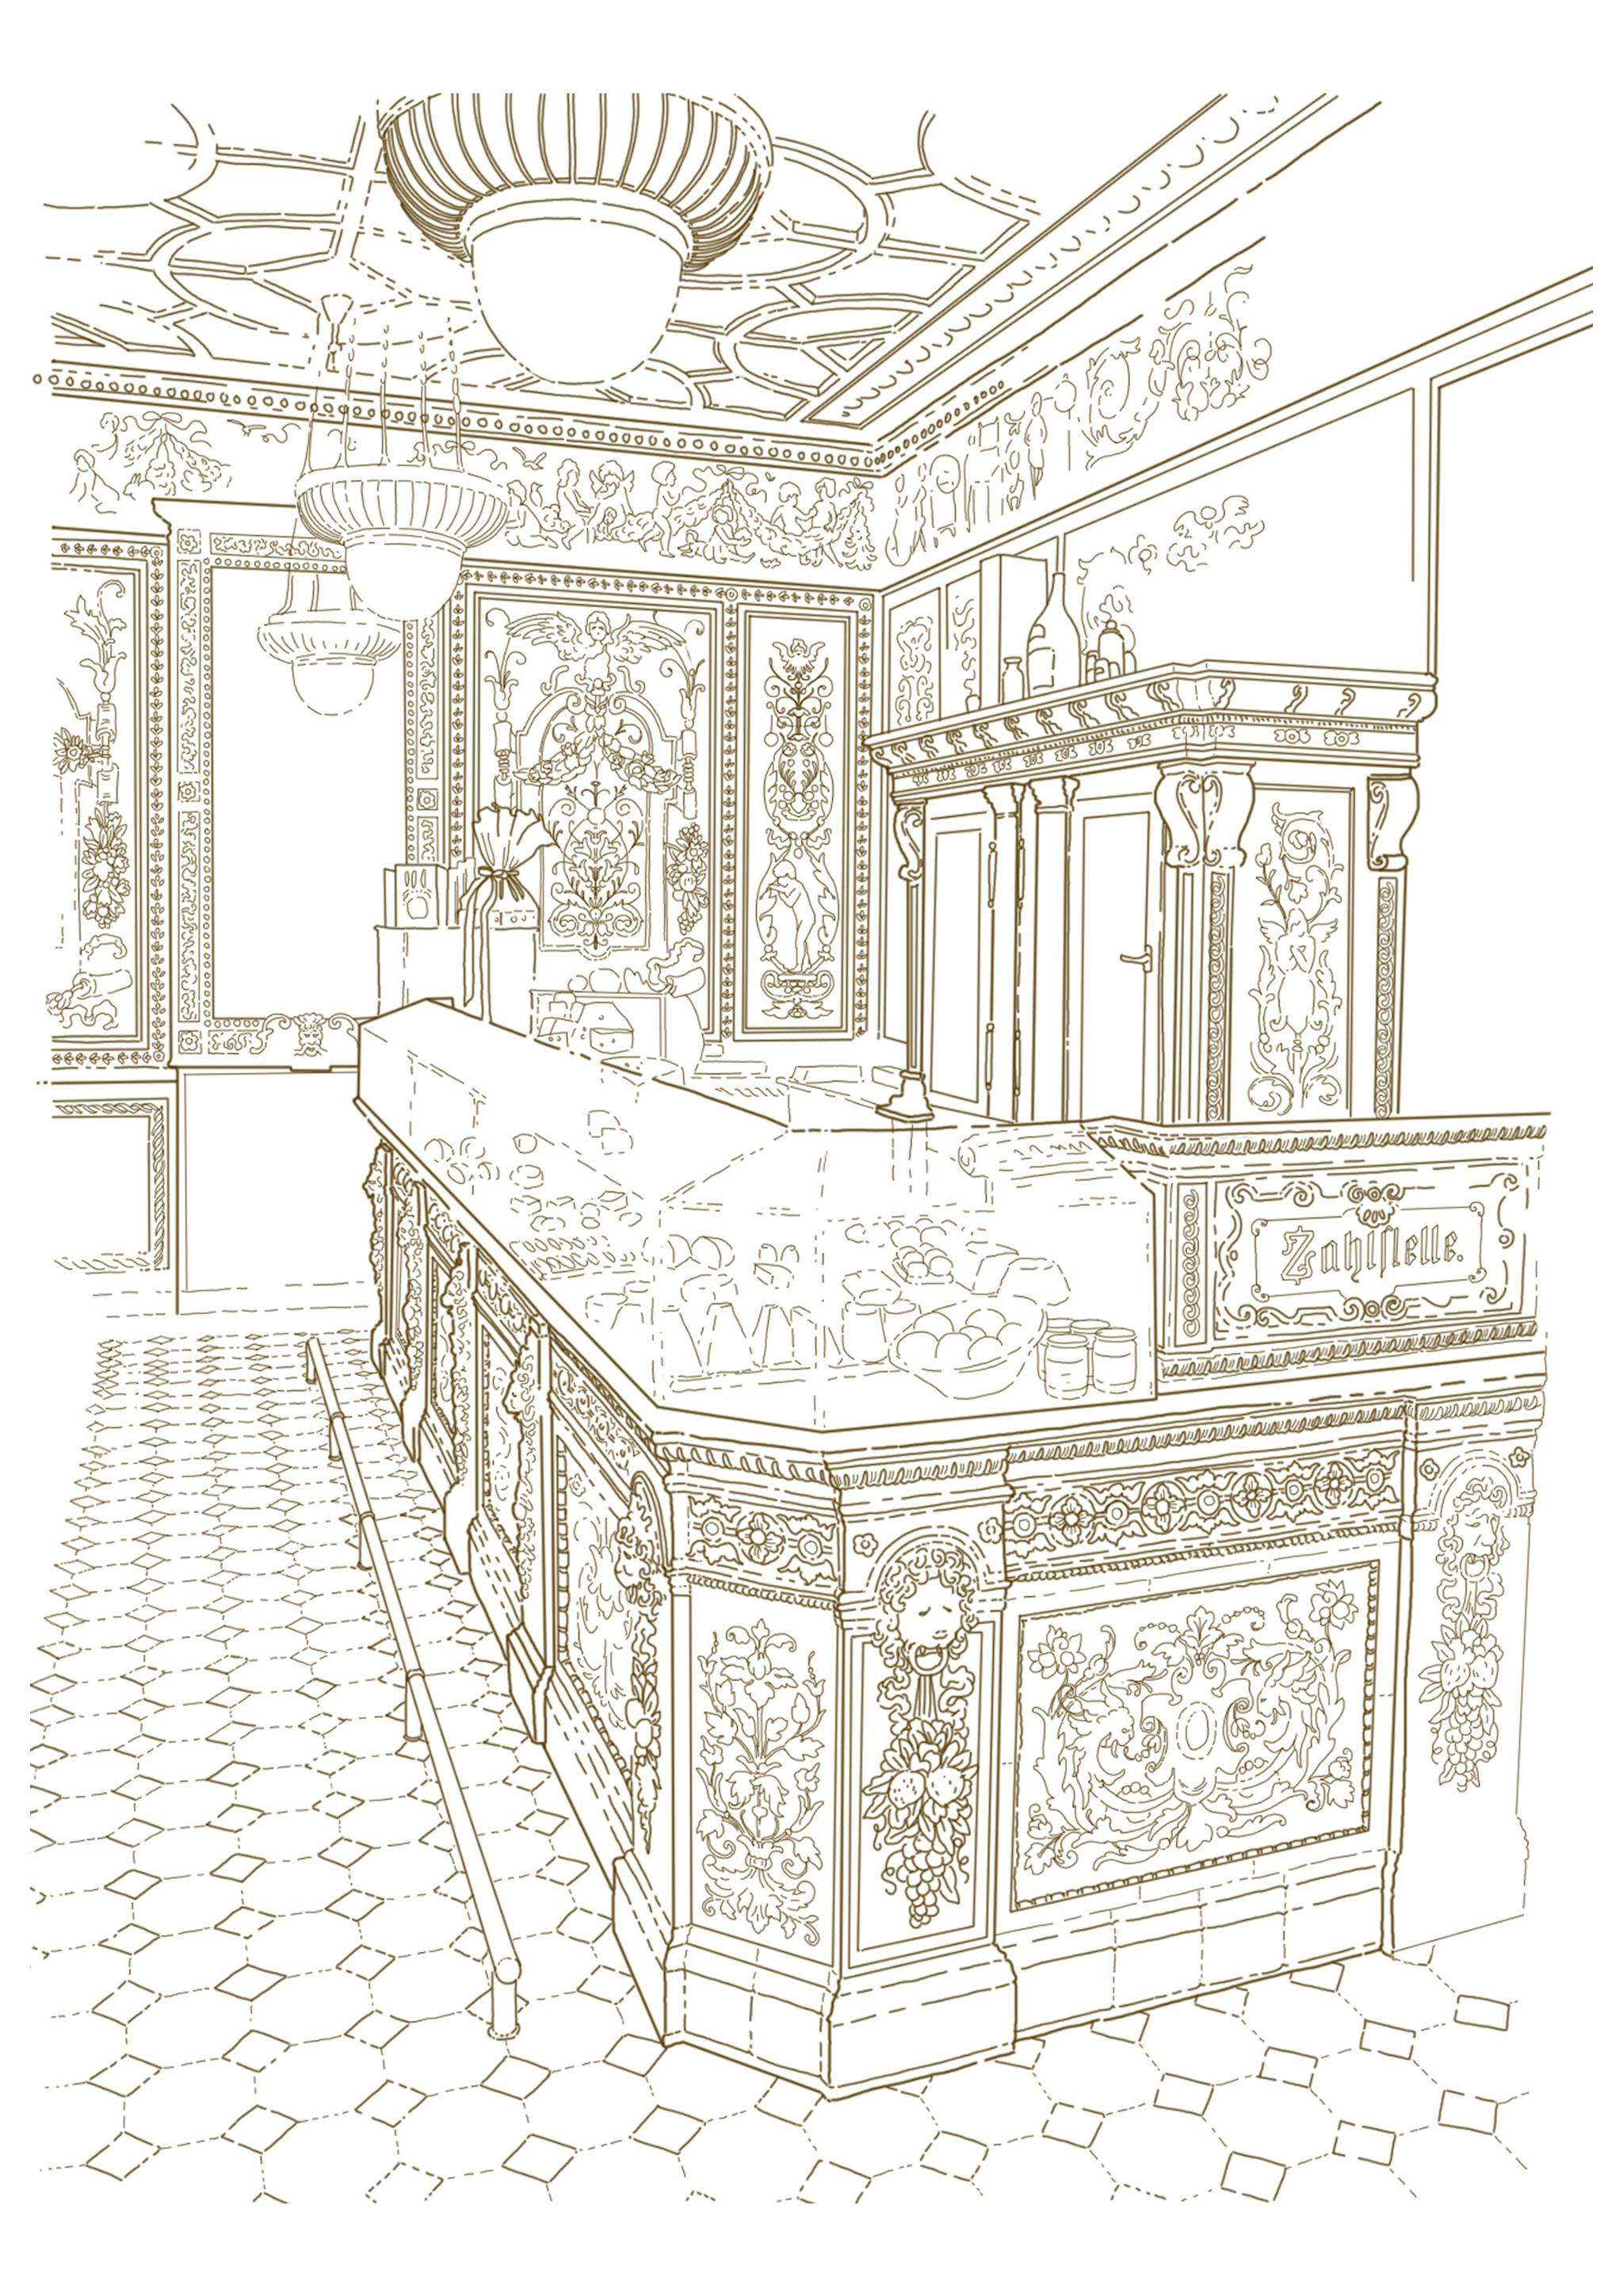 Illustration of the highly decorated Dresdner Molkerei Gebrüder Pfund. Clean lines in profusions making a complex illustration.